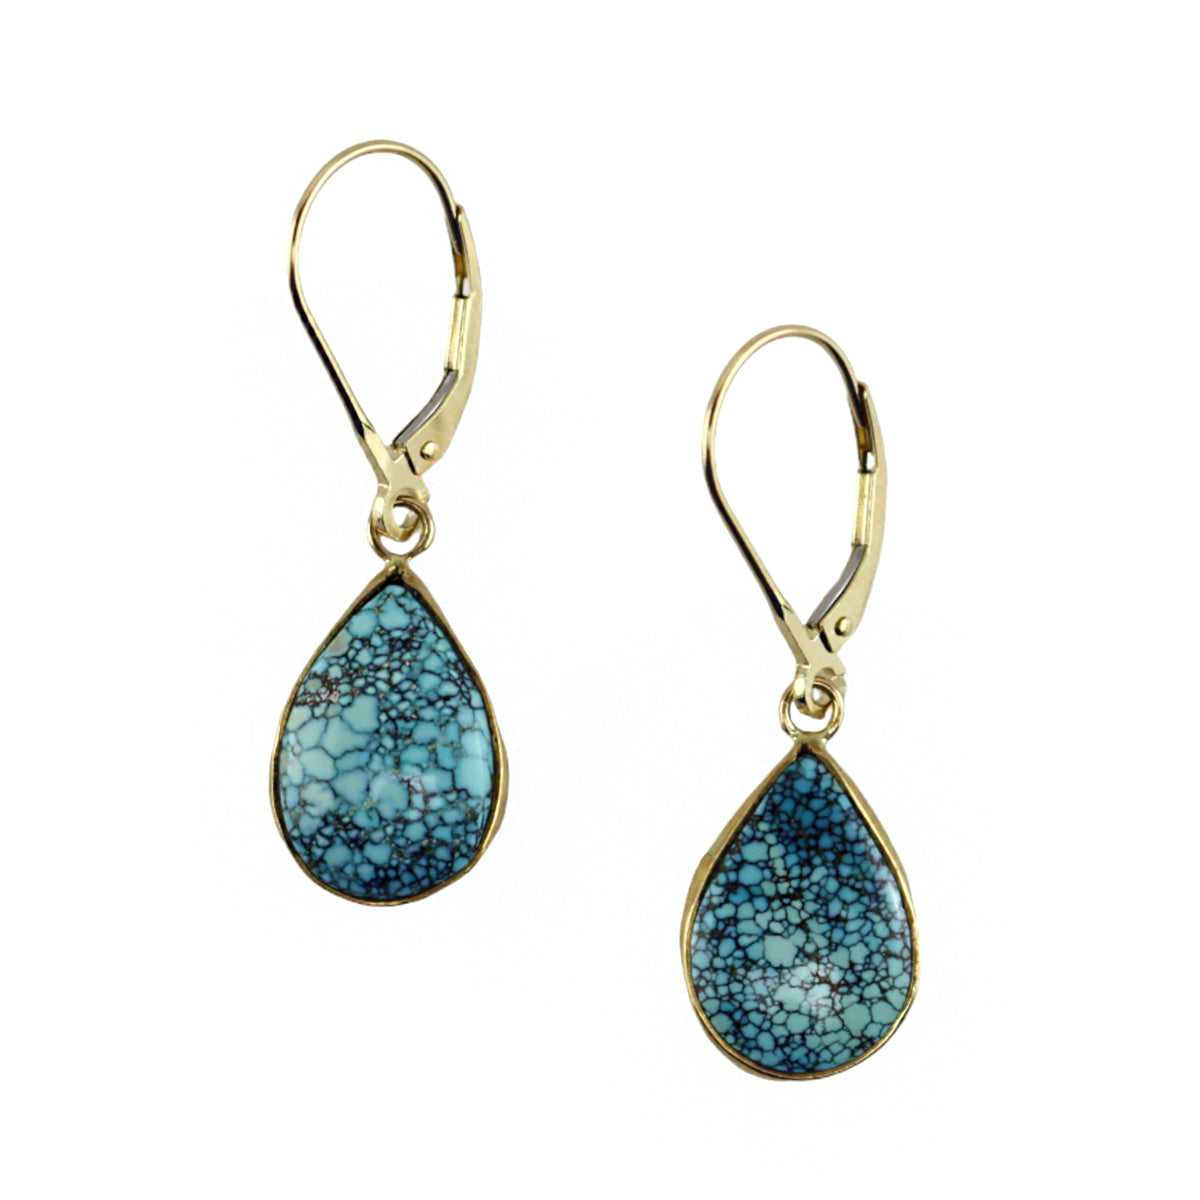 SOLD Sam Patania - Number 8 Turquoise and 18K Gold Pear Shape Hook Earrings, 1.375" x 0.375" (J91699-1123-004)